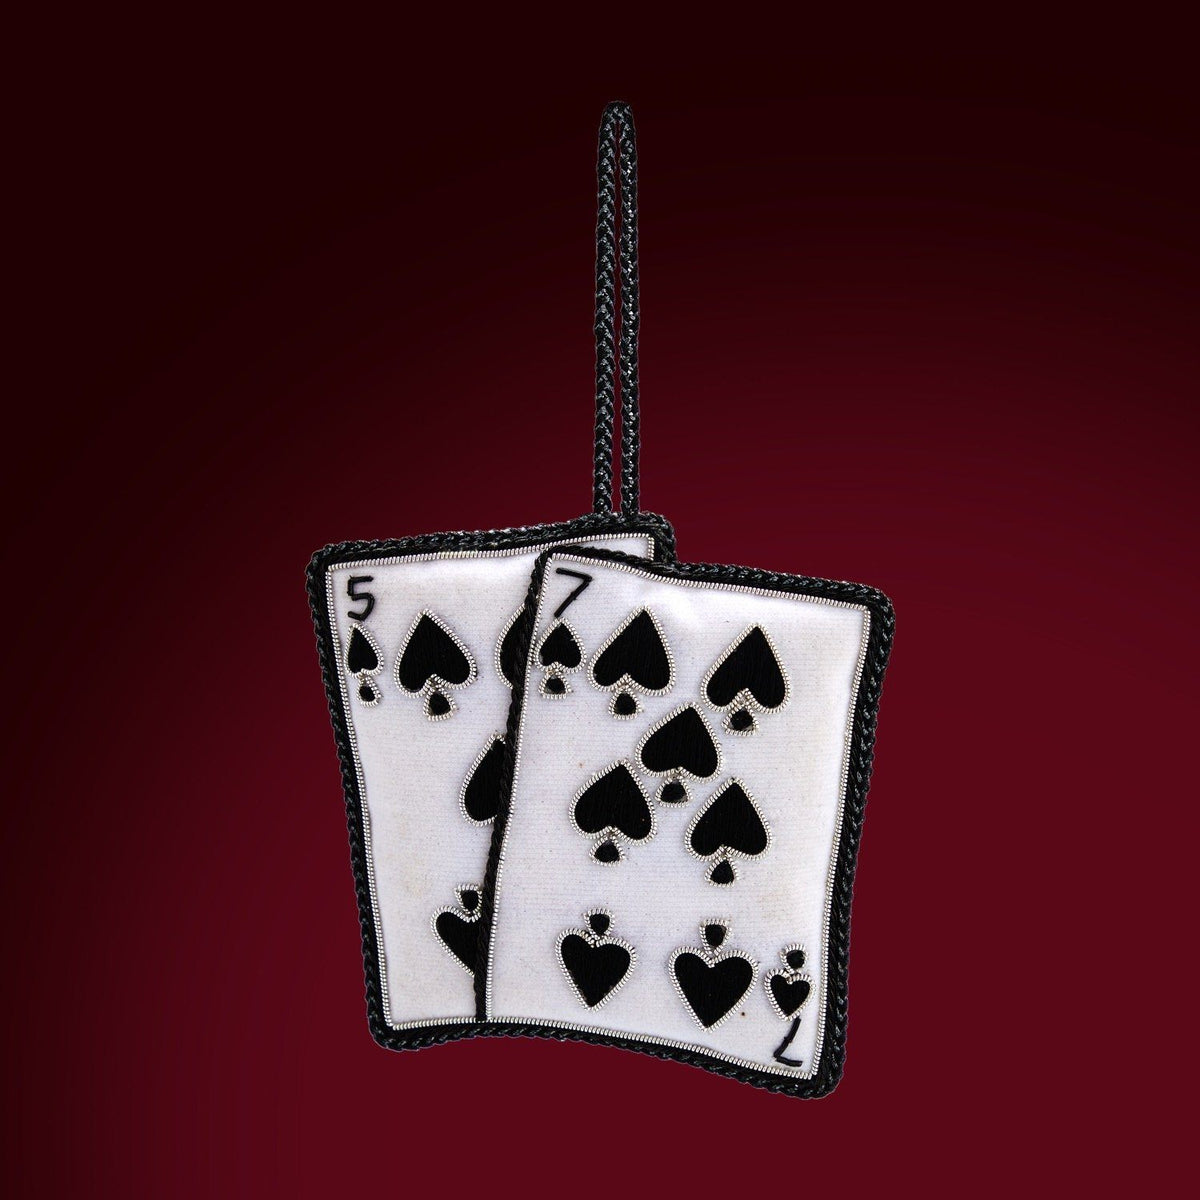 007 Christmas Decoration - White Velvet and Black Playing Cards DECORATION Tinker Tailor 